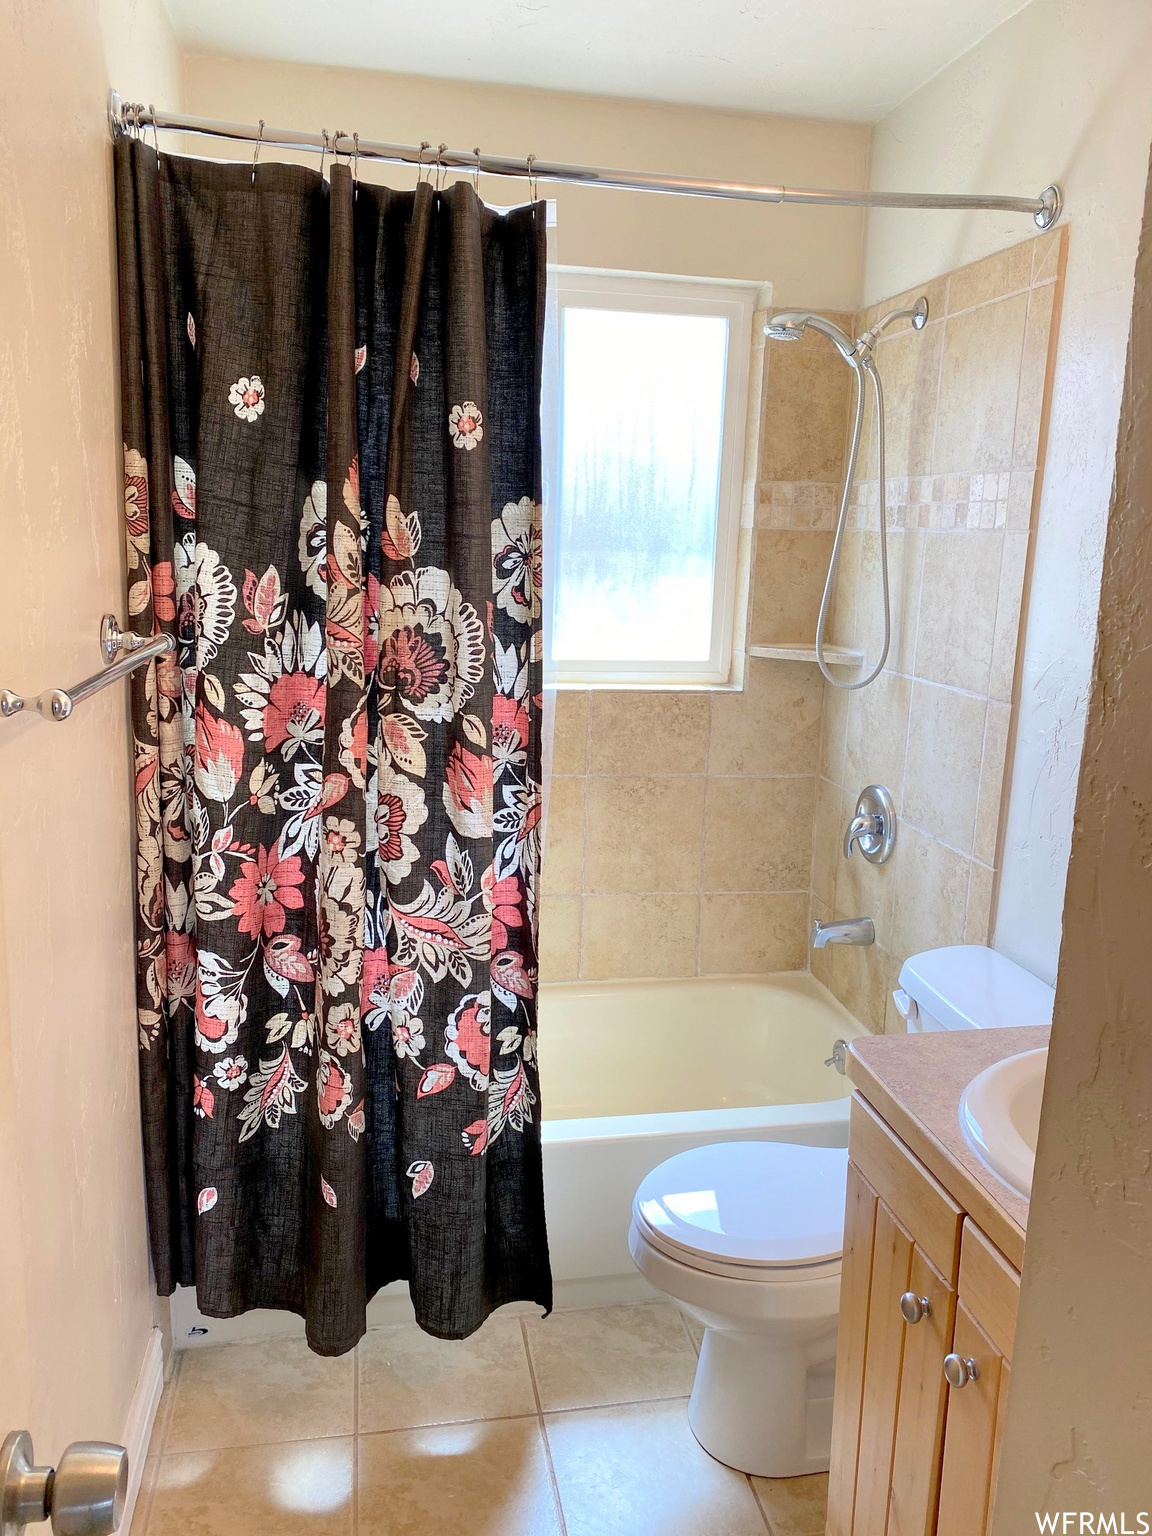 Full bathroom with vanity, tile flooring, shower / tub combo, and toilet